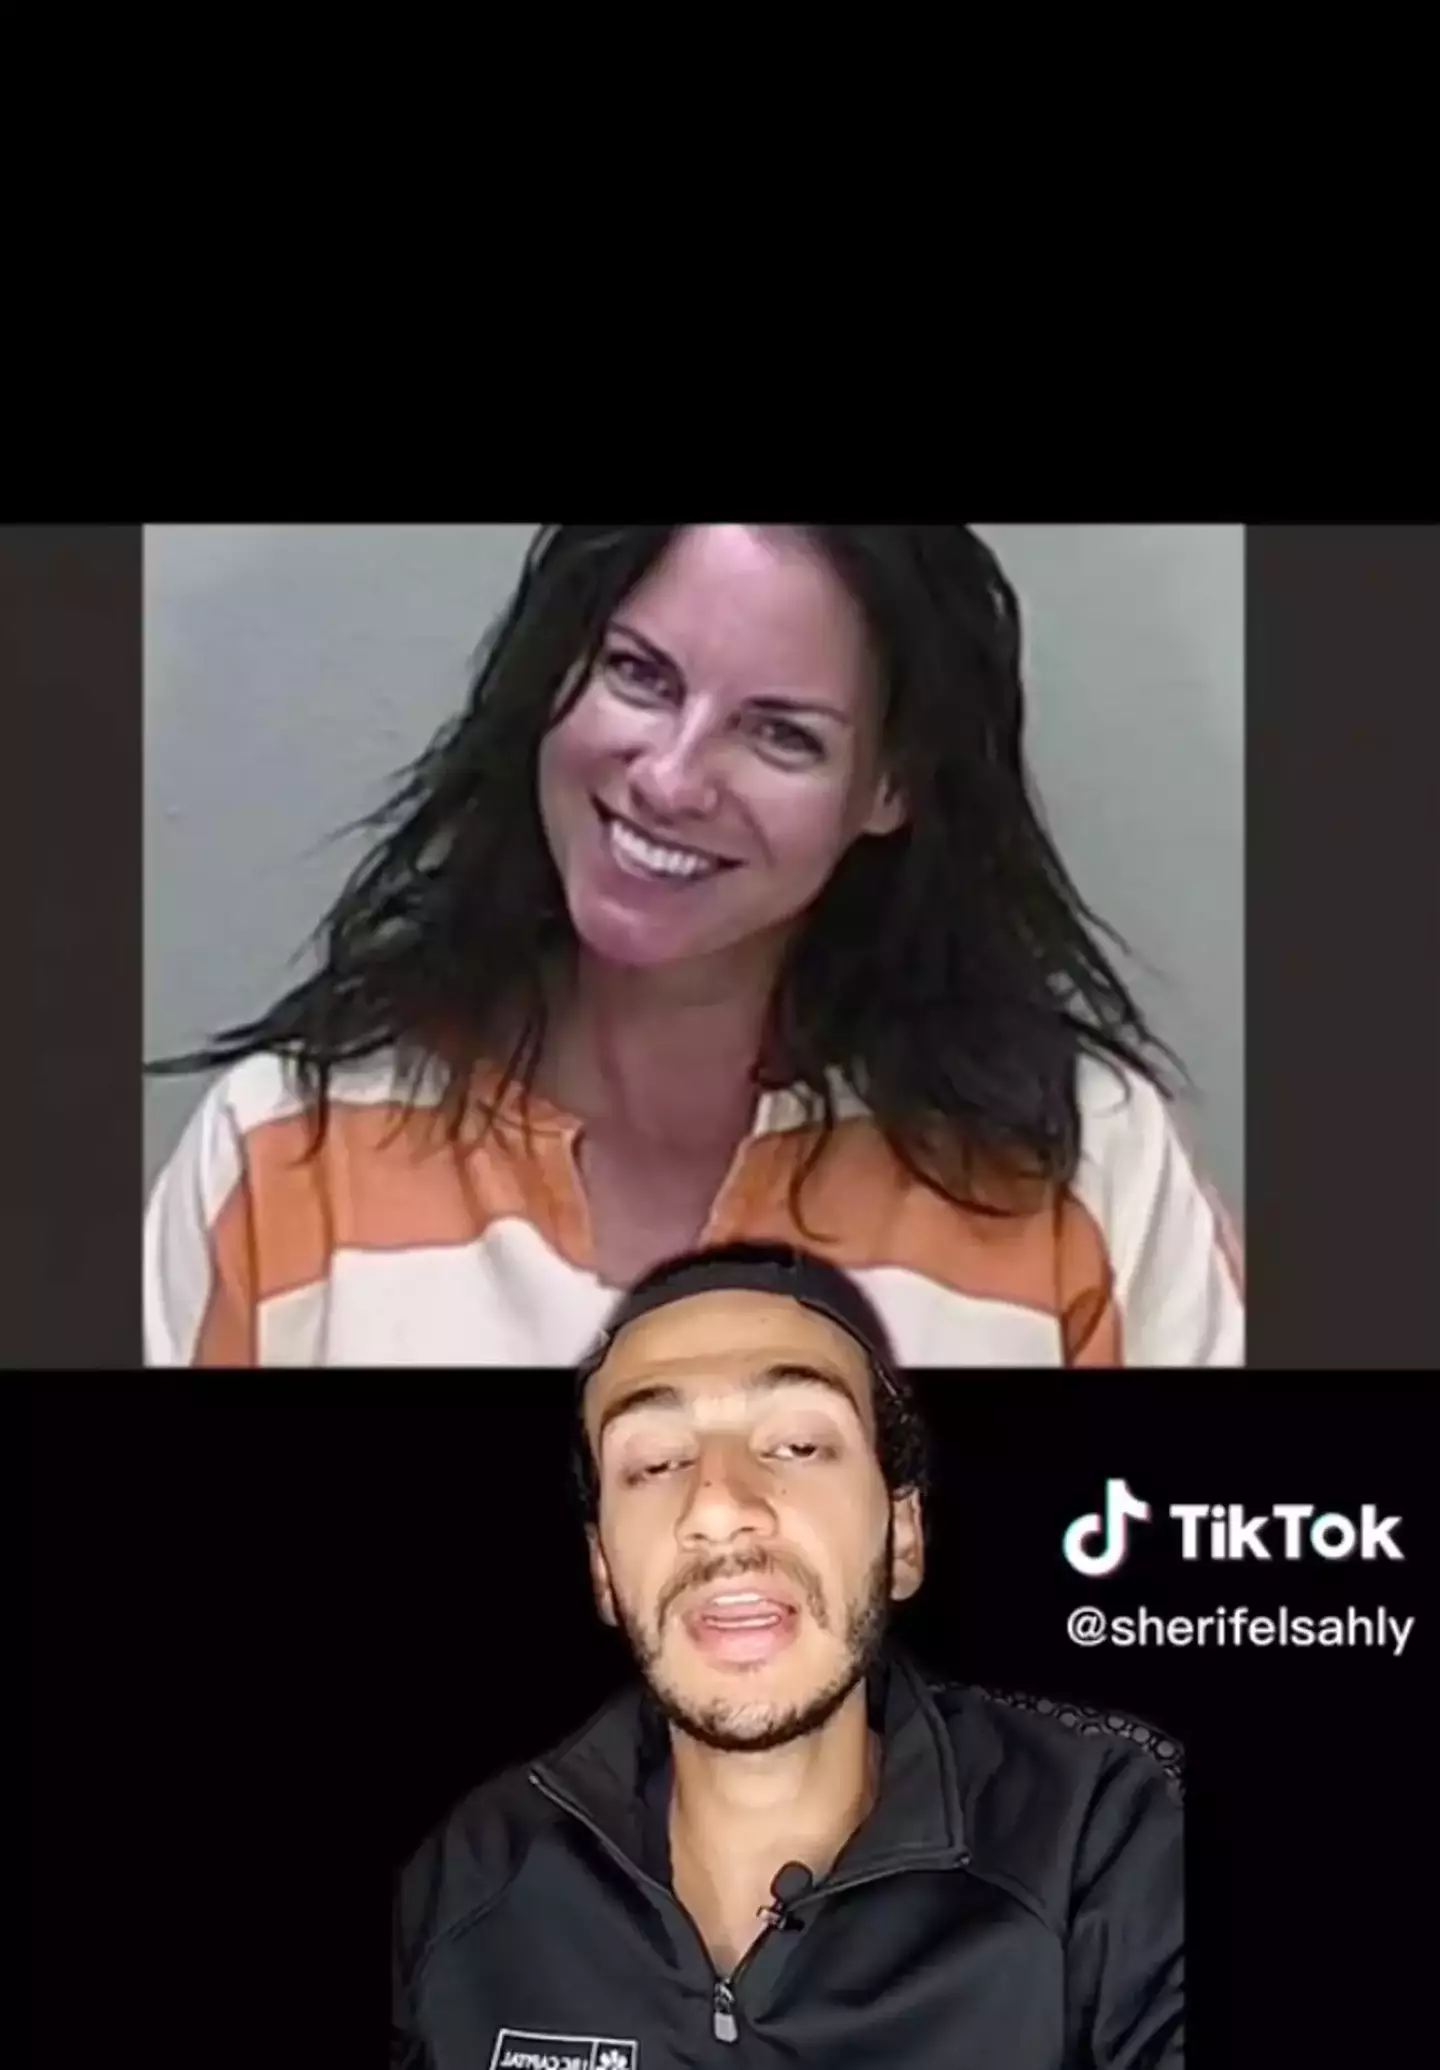 In the video, TikToker @sherifelsahly explained why it's never a good idea to smile in your mugshot.